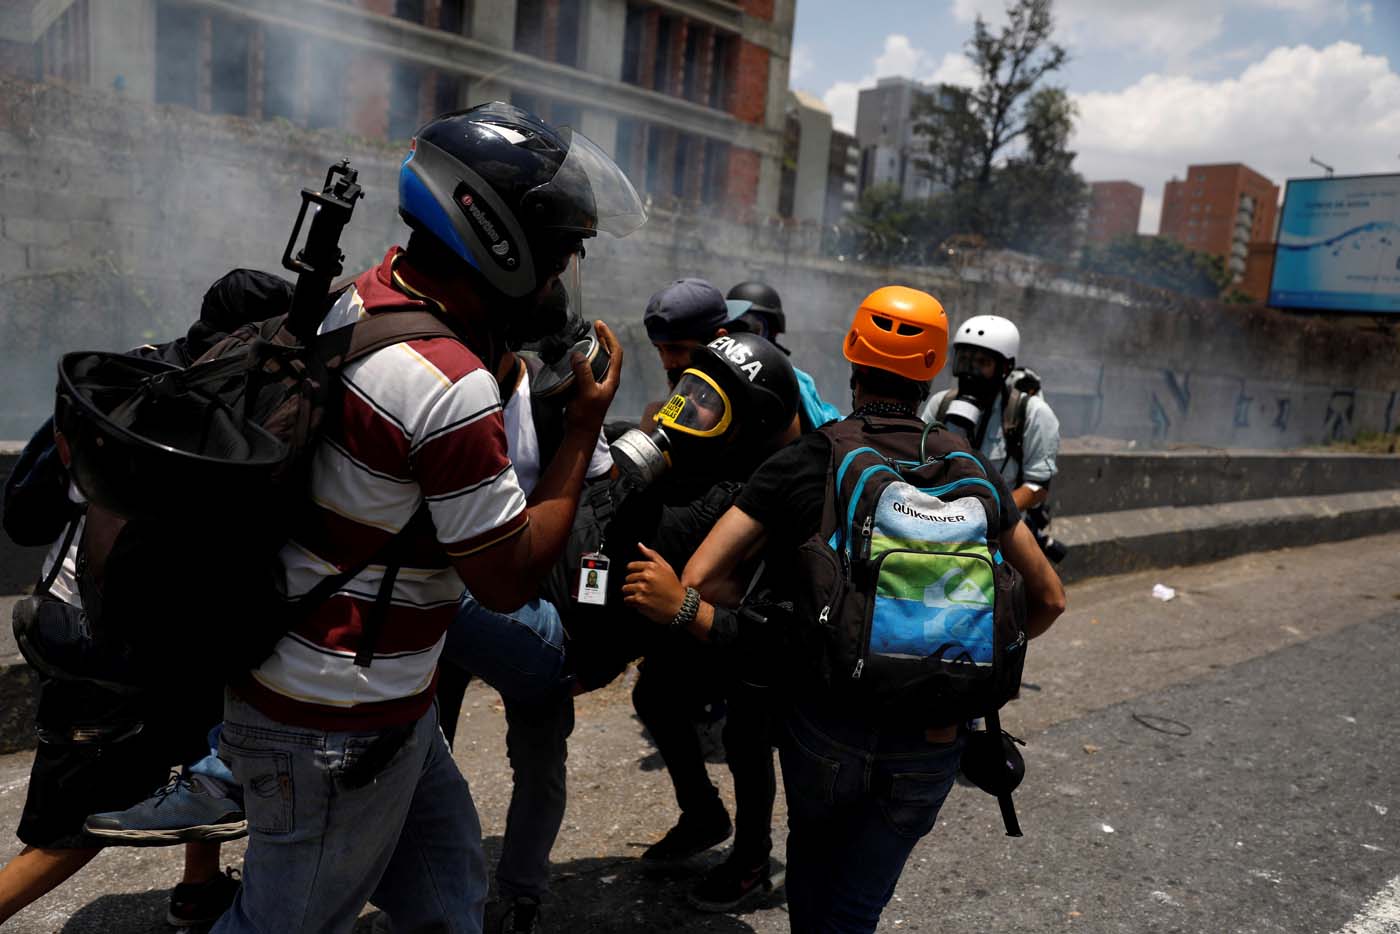 A member of the media is helped during a rally against Venezuela's President Nicolas Maduro's government in Caracas, Venezuela April 10, 2017. REUTERS/Carlos Garcia Rawlins